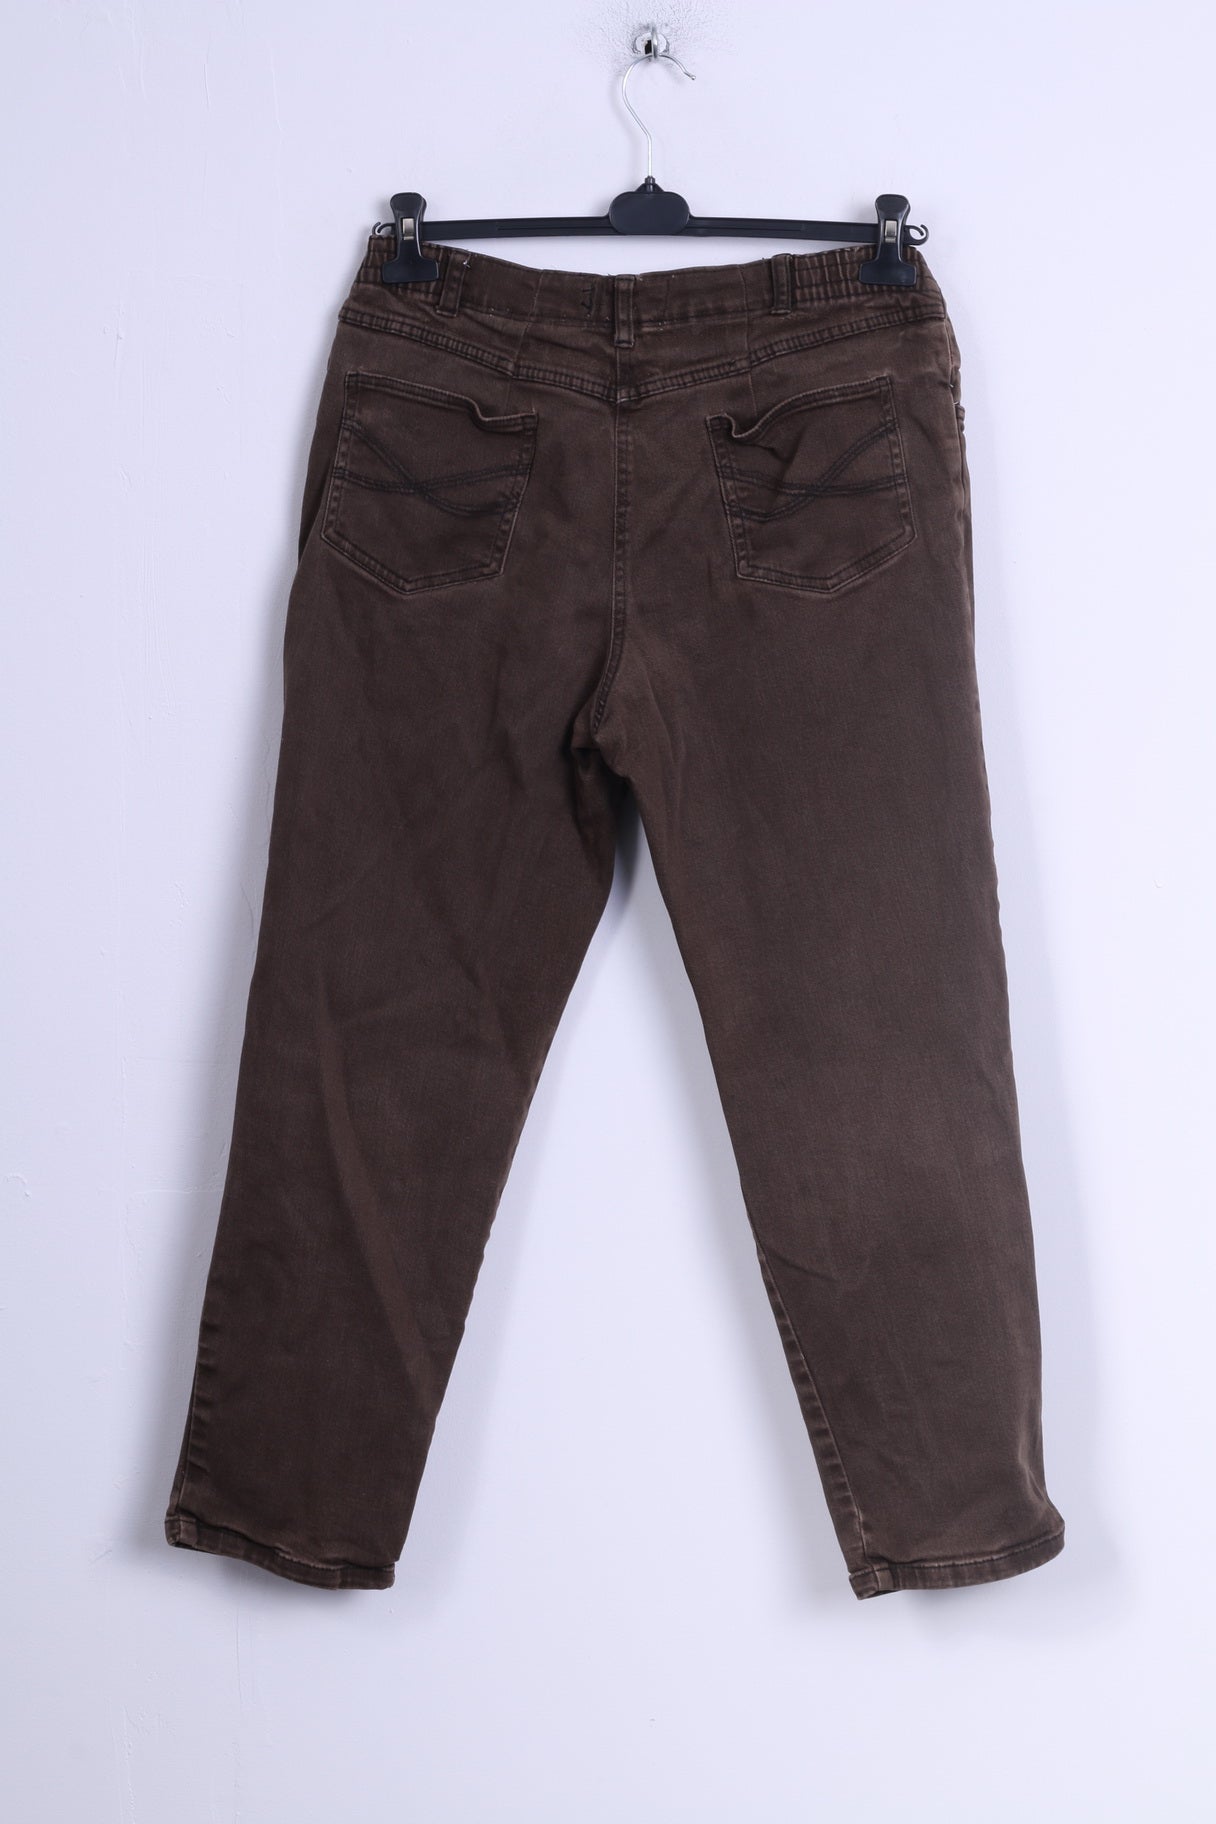 John Baner Womens 20 46 Trousers Brown Cotton Jeans Casual Pants